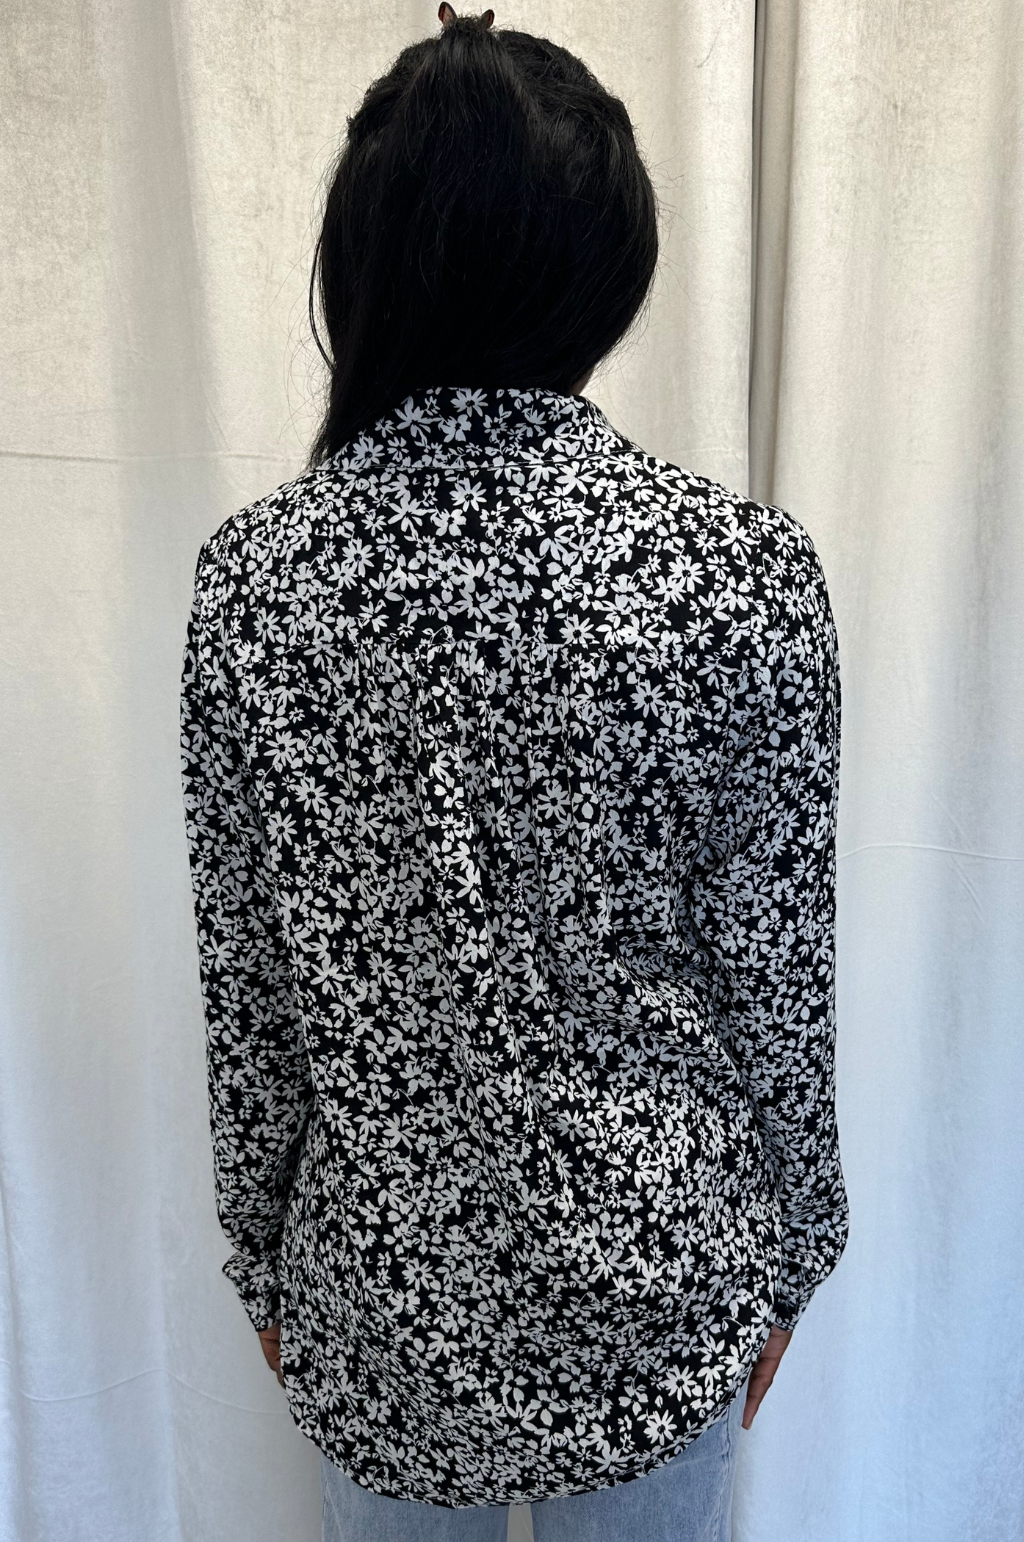 Black and White Button up by Garden House Imports + SoSis - SoSis